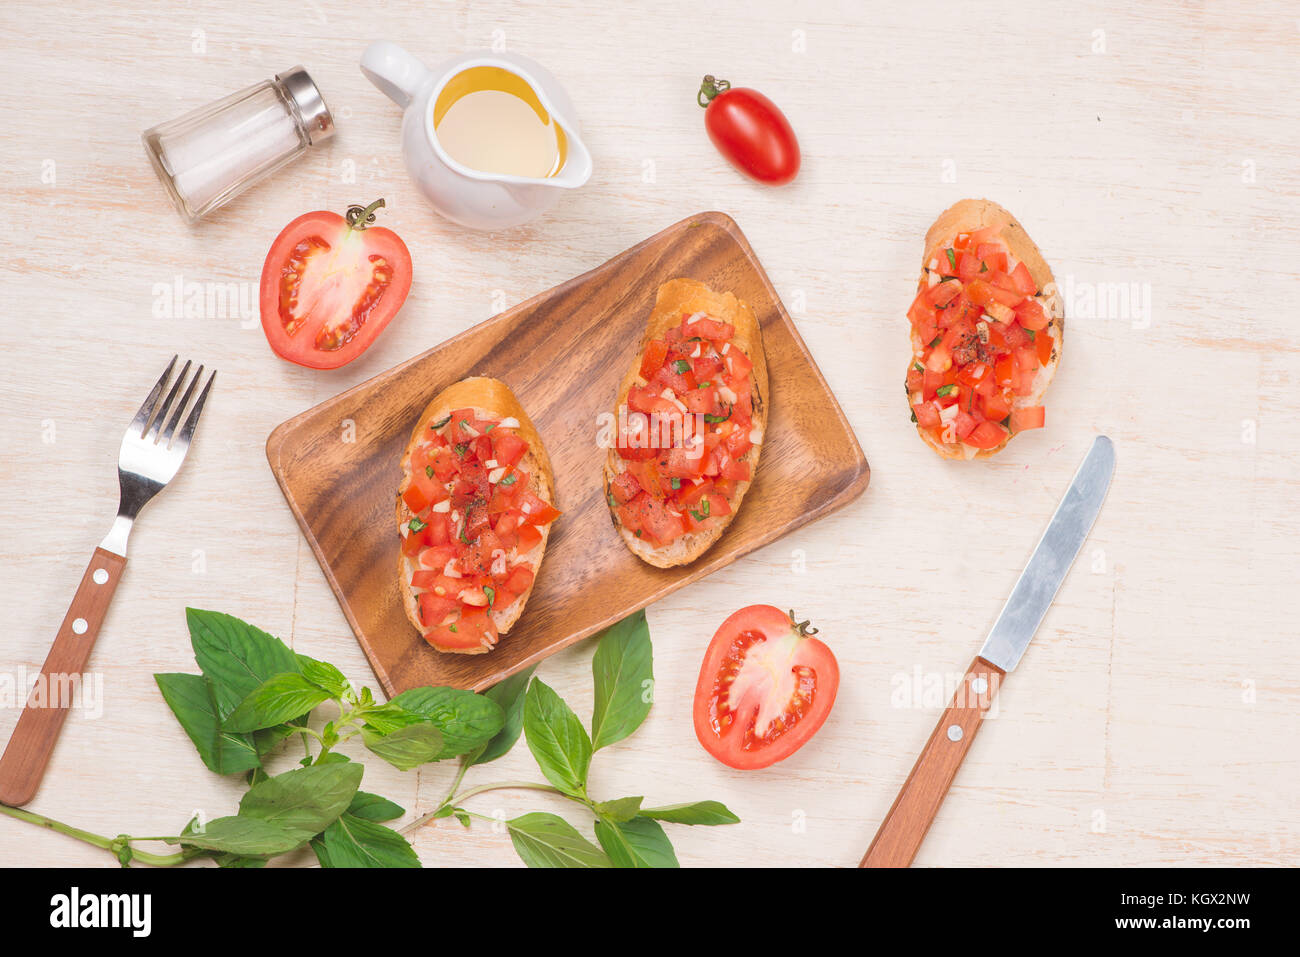 Preparing delicious Italian tomato bruschetta with chopped vegetables, herbs and oil Stock Photo